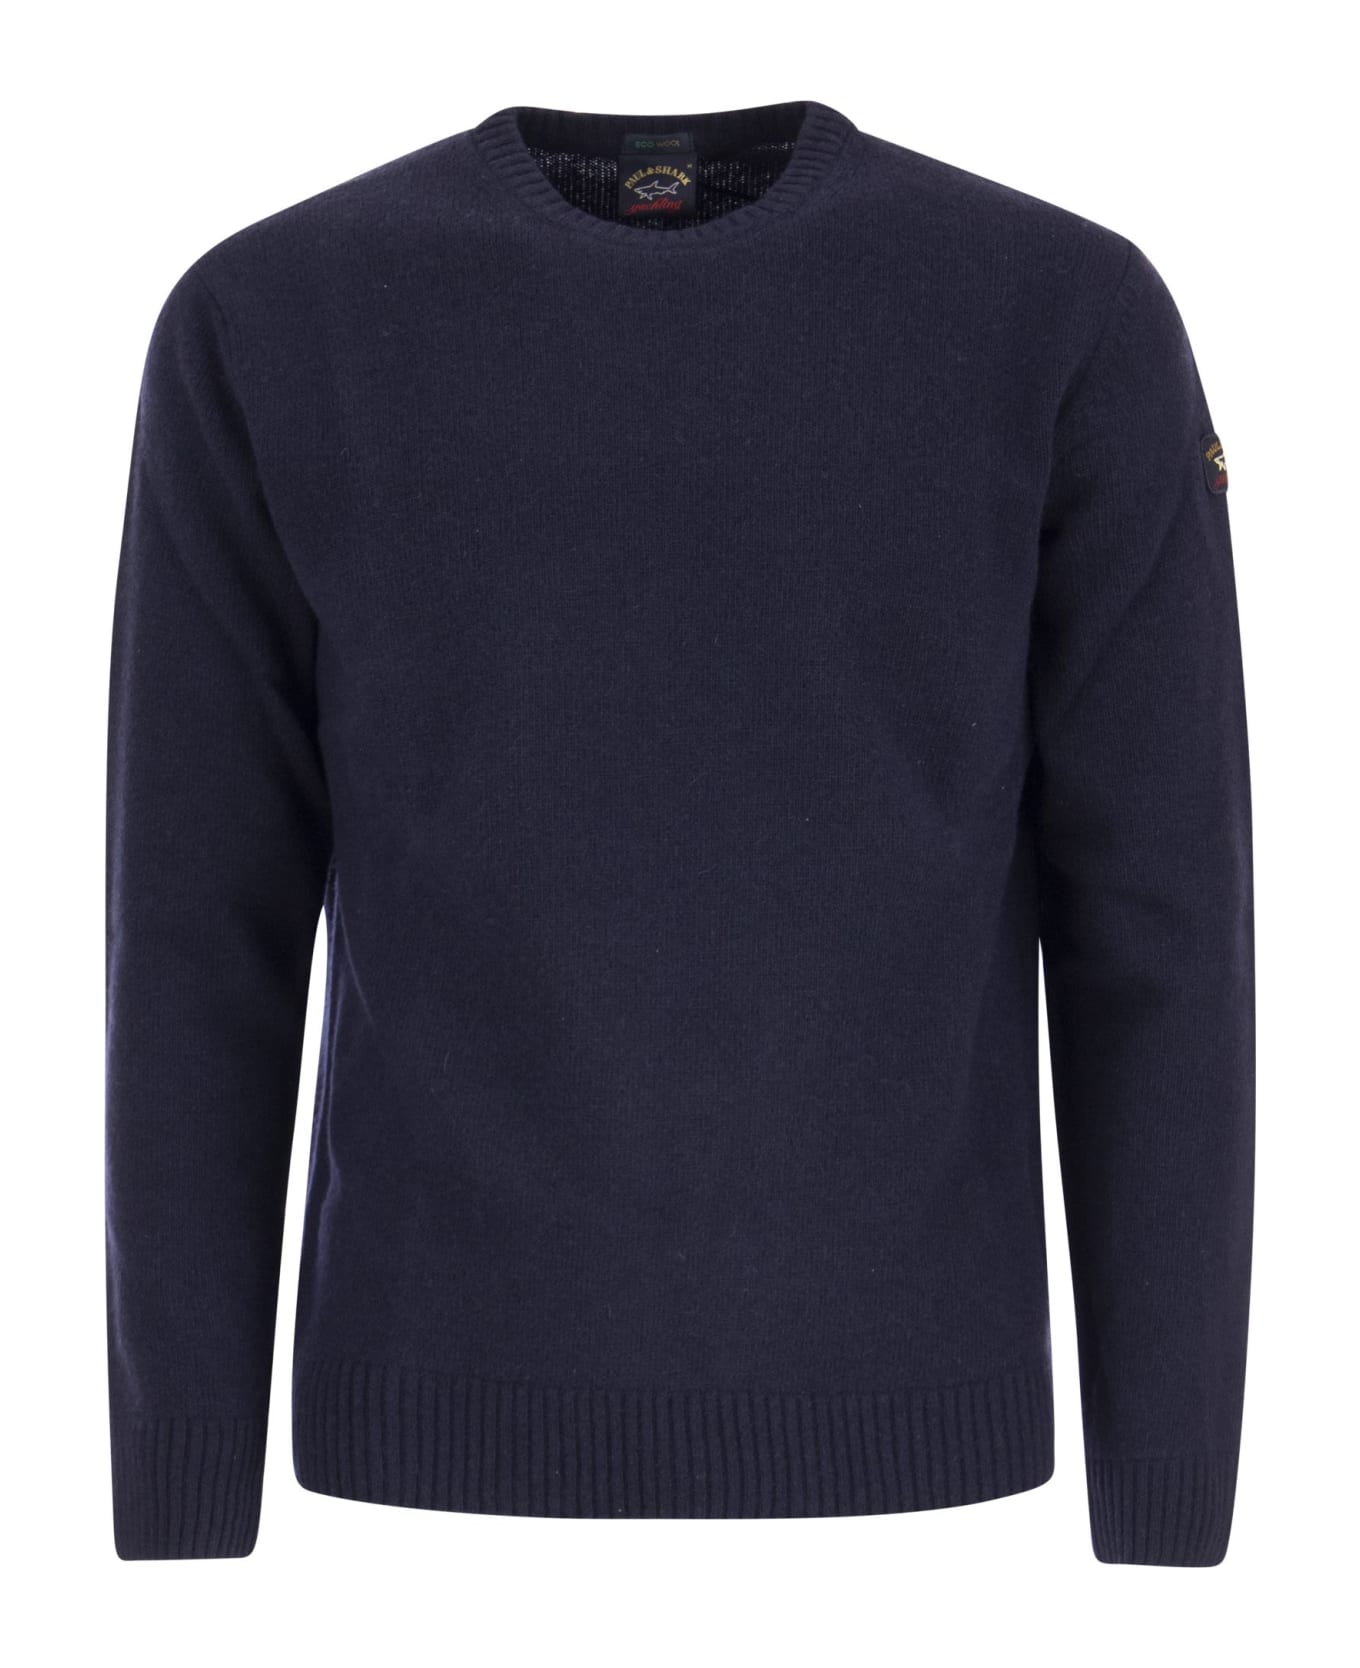 Paul&Shark Wool Crew Neck With Arm Patch - Blue